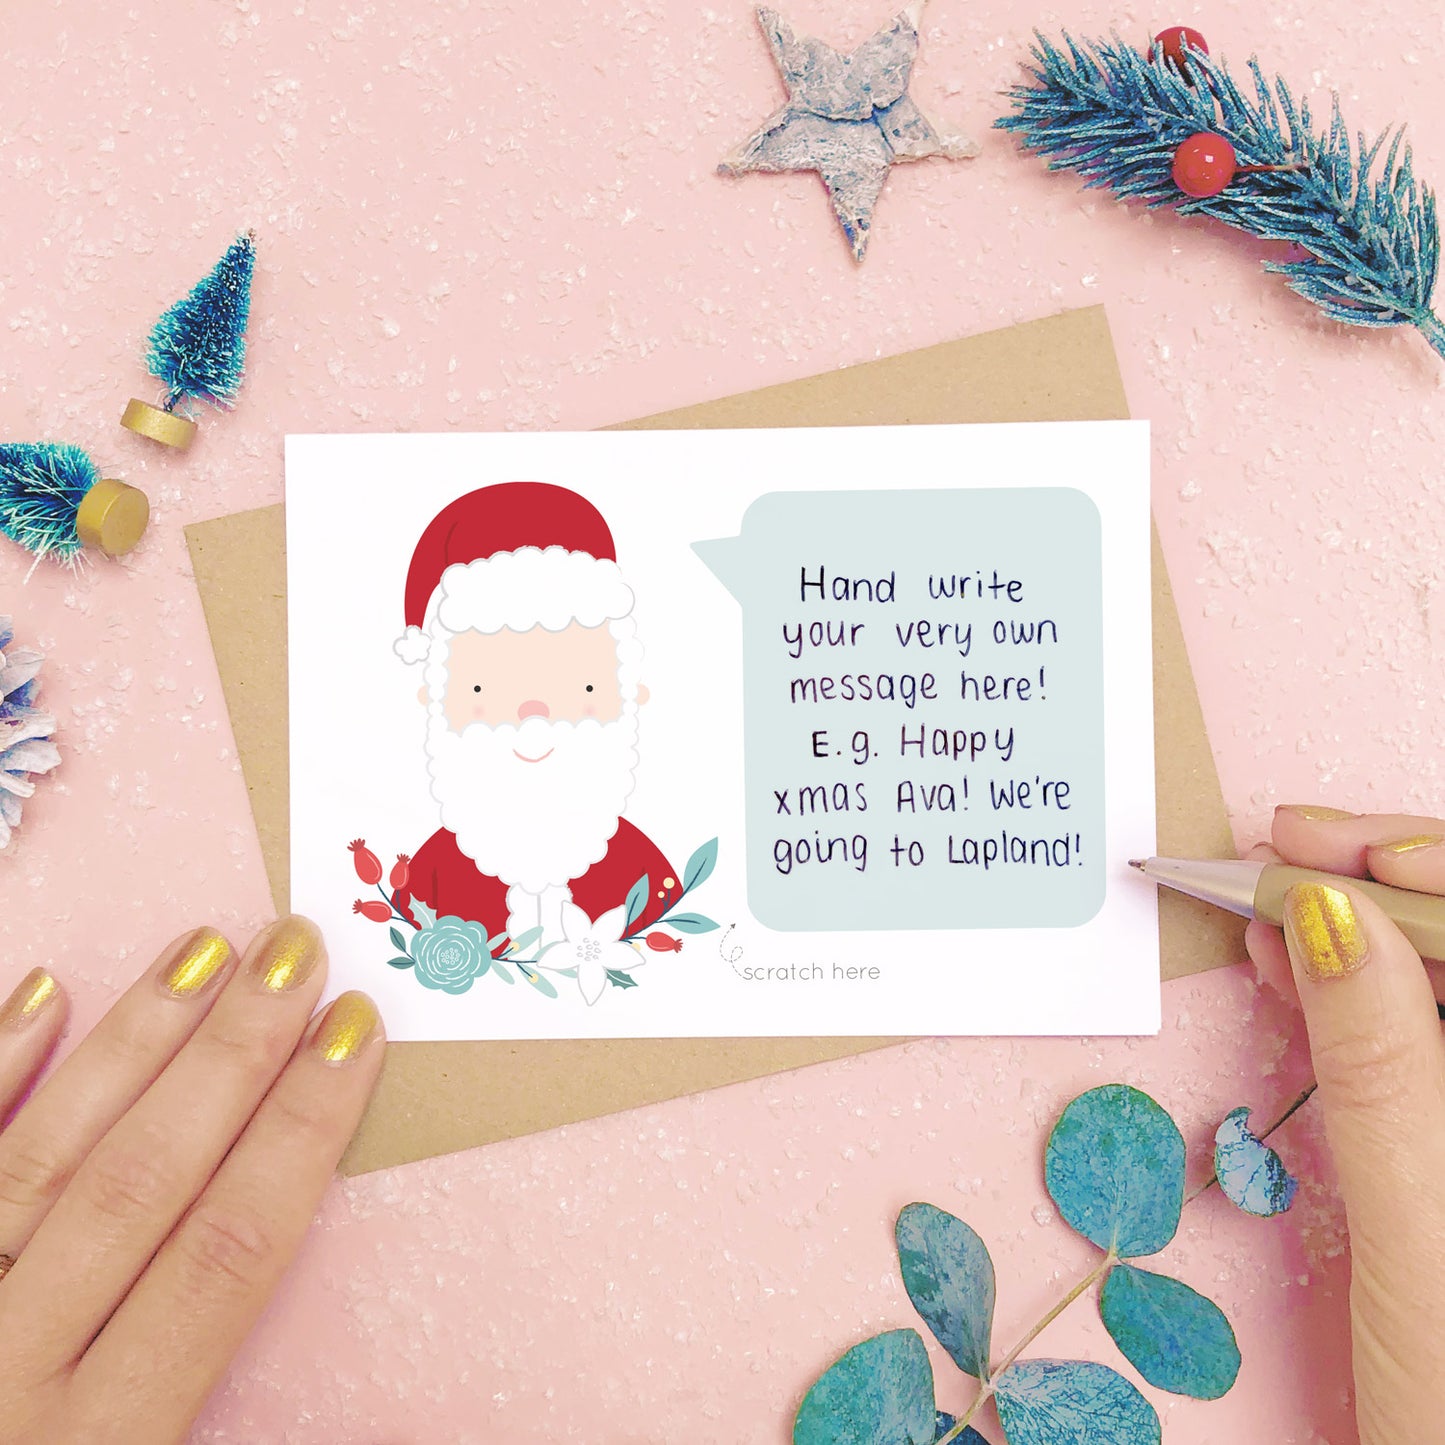 An example of a handwritten message on a personalised scratch card. Shot on a pink background with festive photo props.